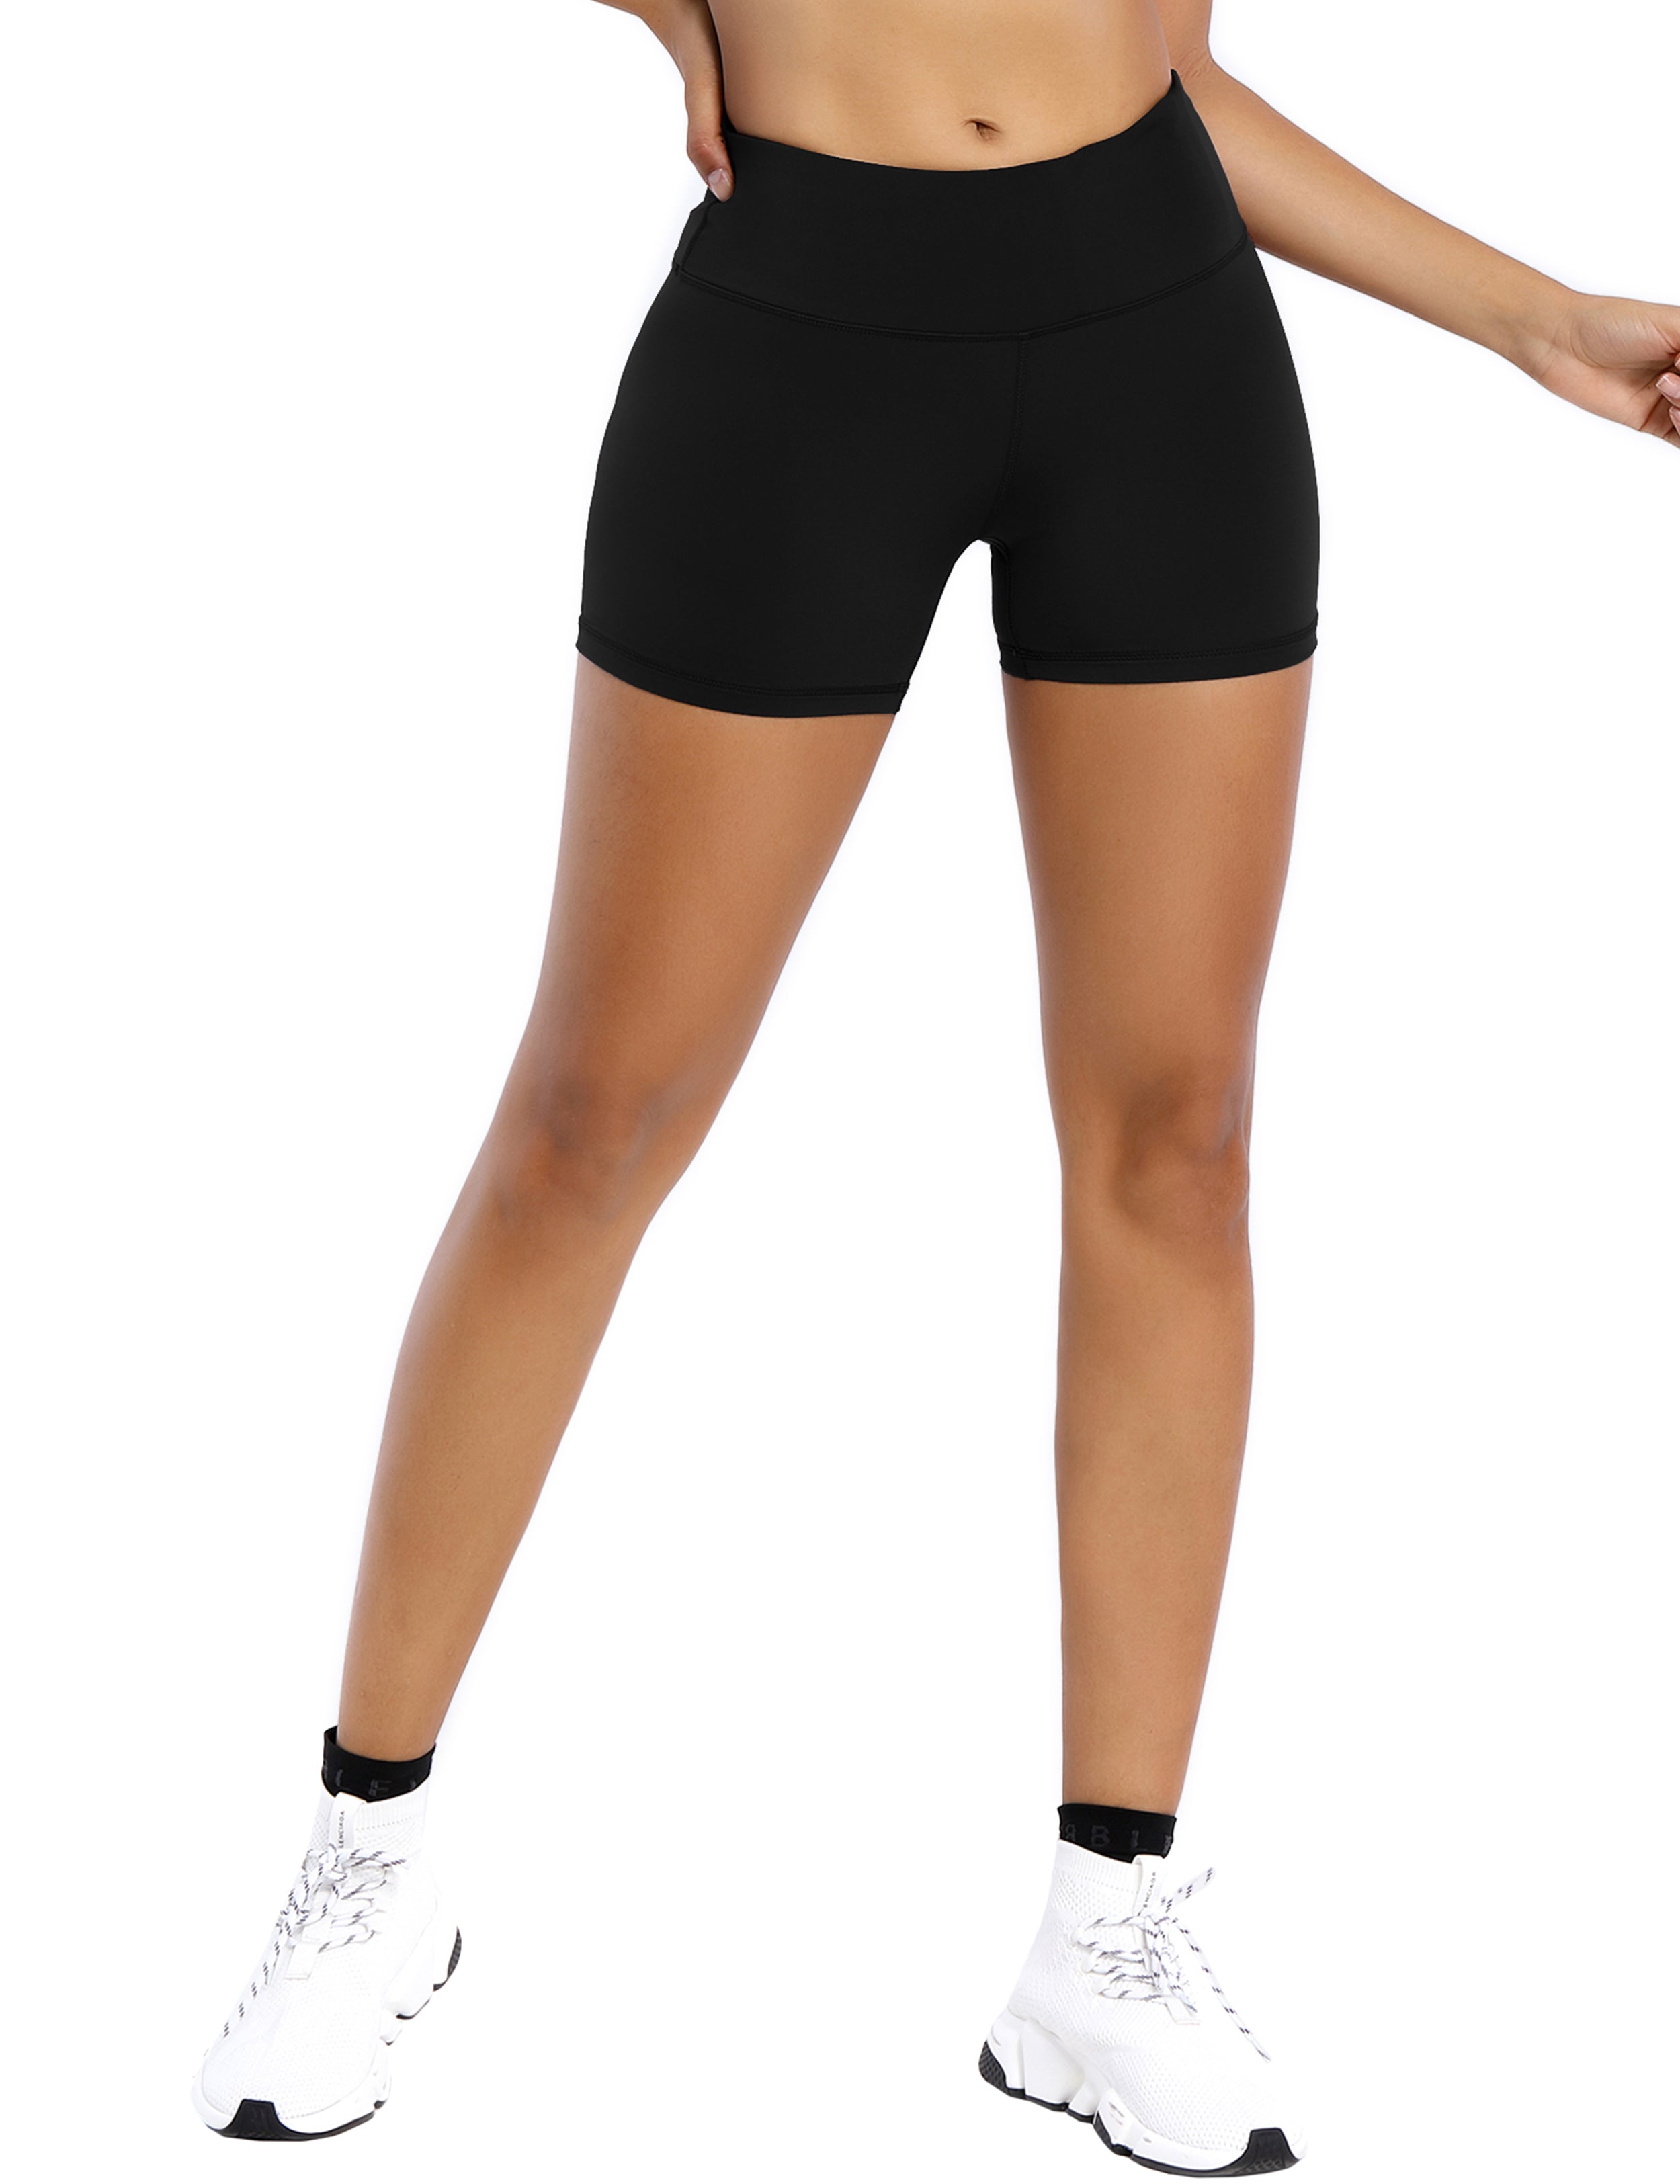 4" Gym Shorts black Sleek, soft, smooth and totally comfortable: our newest style is here. Softest-ever fabric High elasticity High density 4-way stretch Fabric doesn't attract lint easily No see-through Moisture-wicking Machine wash 75% Nylon, 25% Spandex